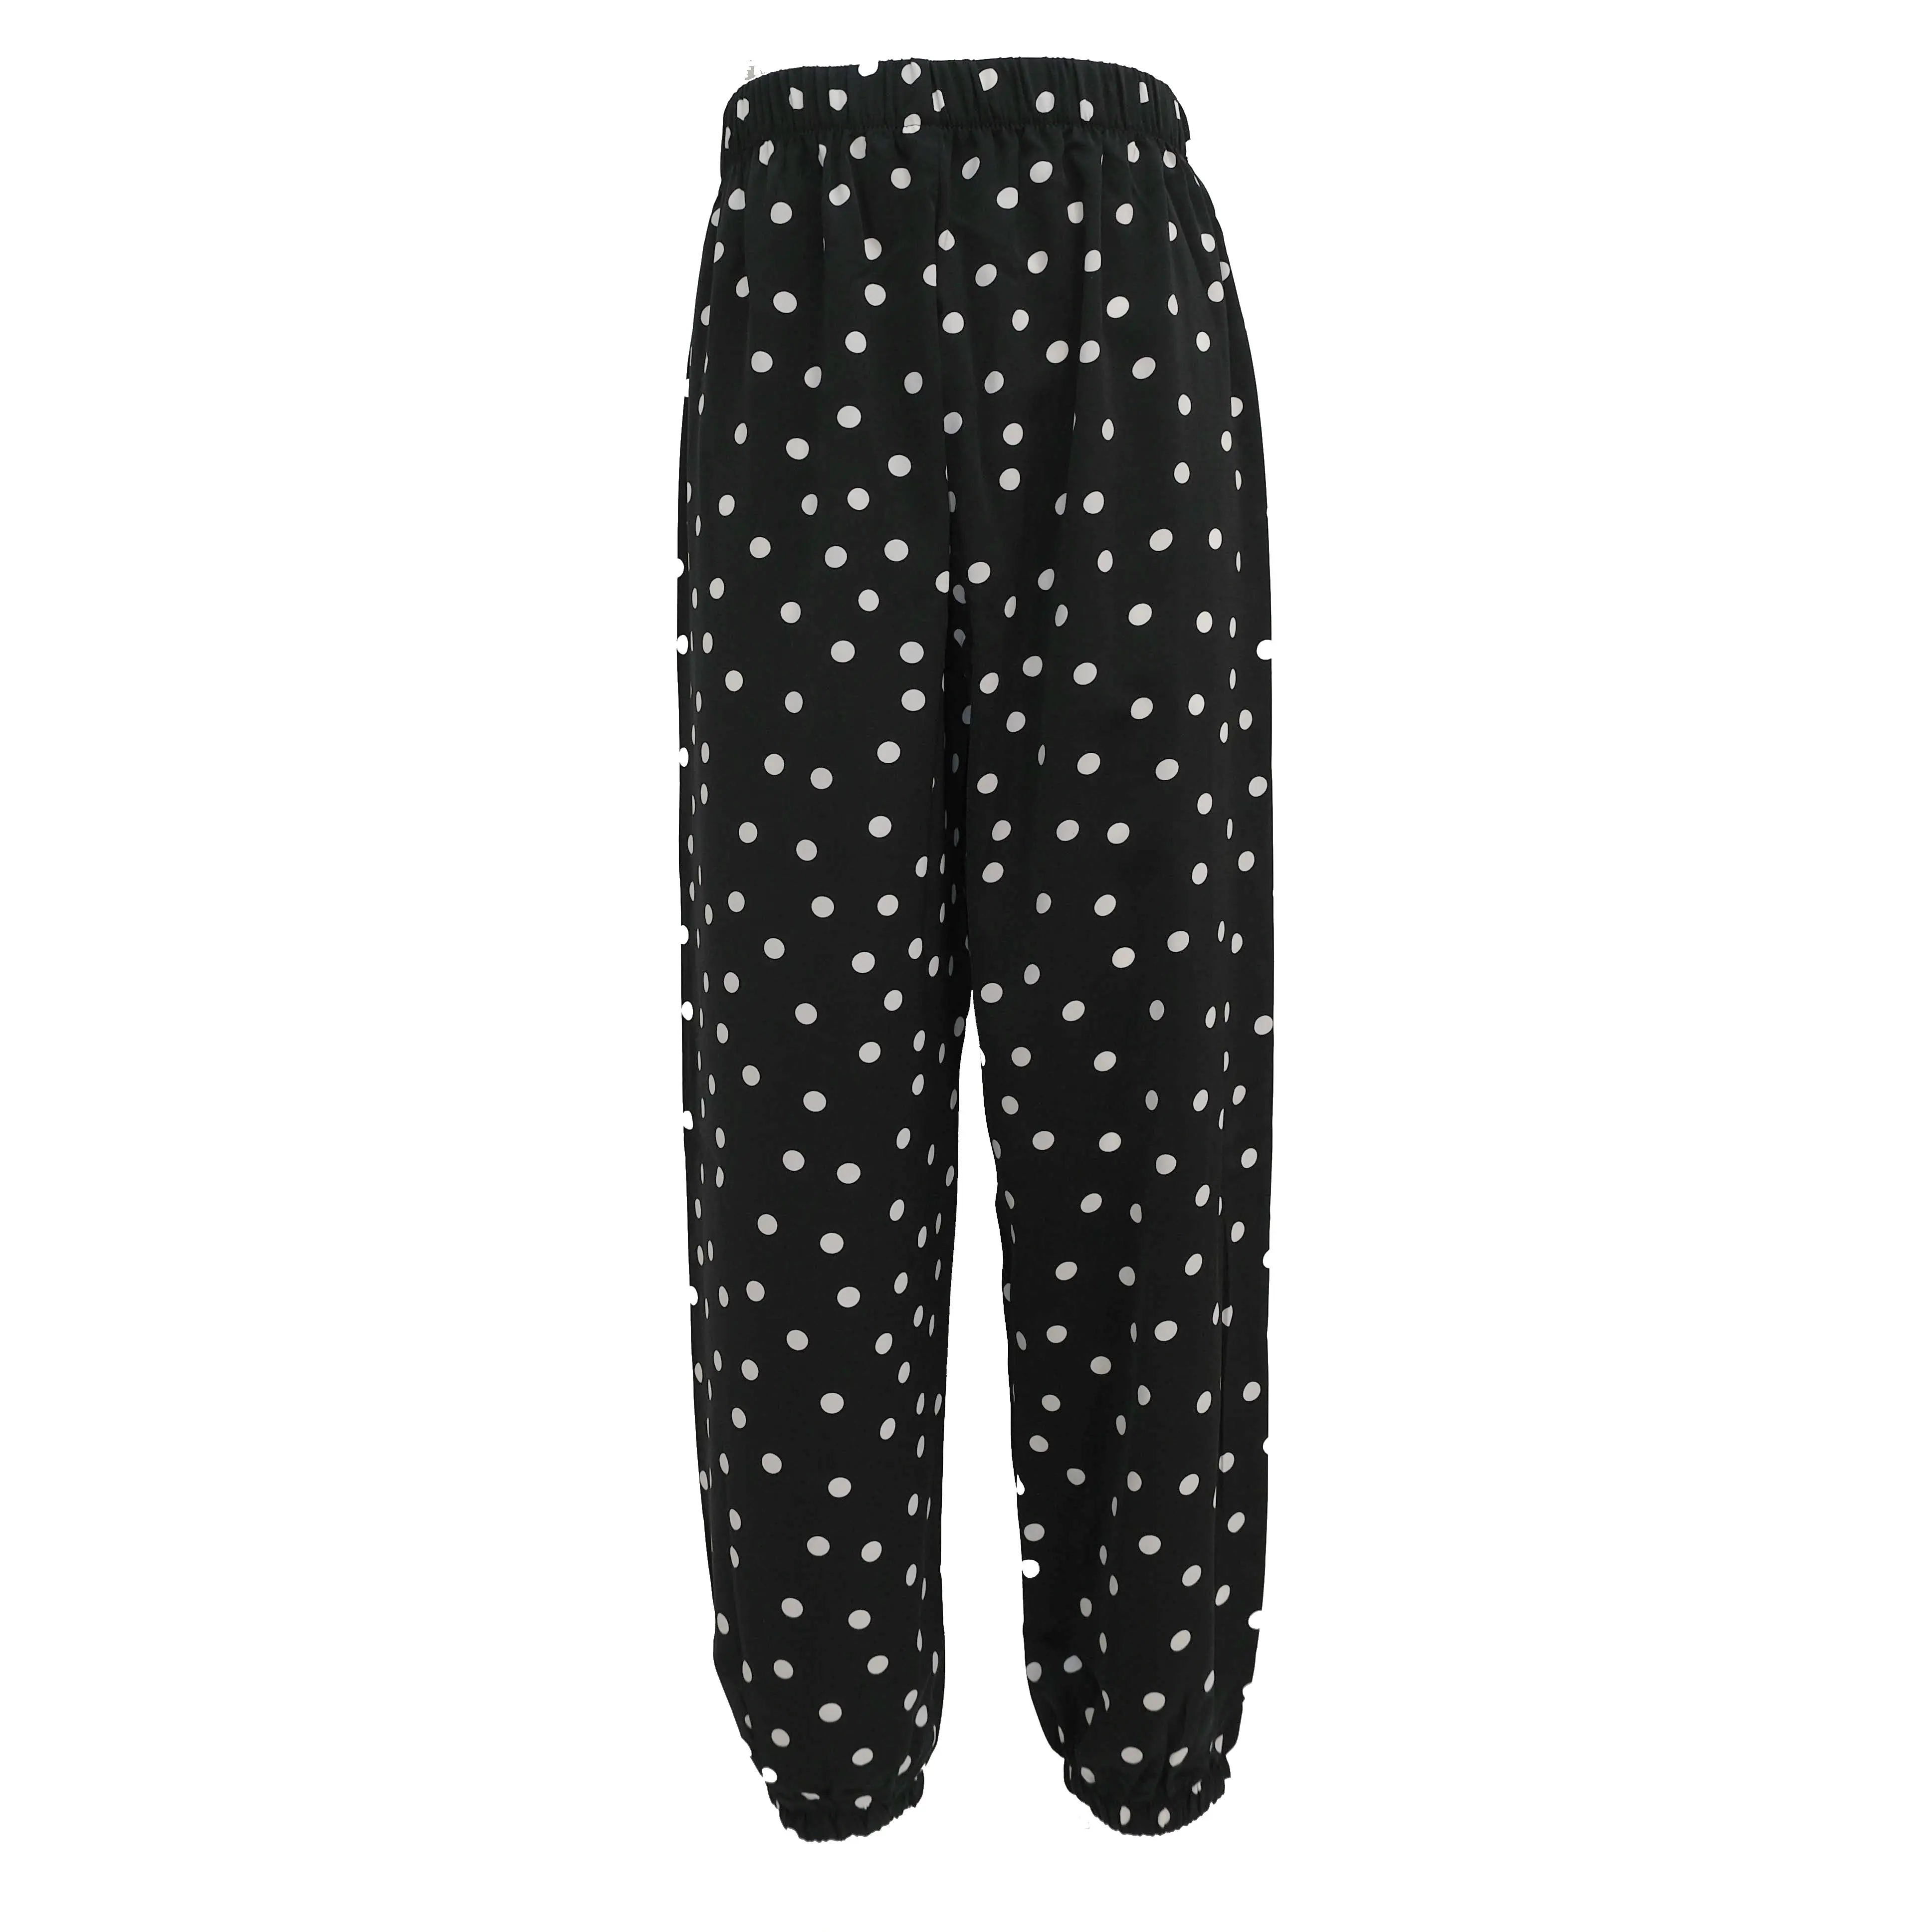 Women's summer thin black and white polka dot pants outerwear casual pants quick-drying nine-point trousers